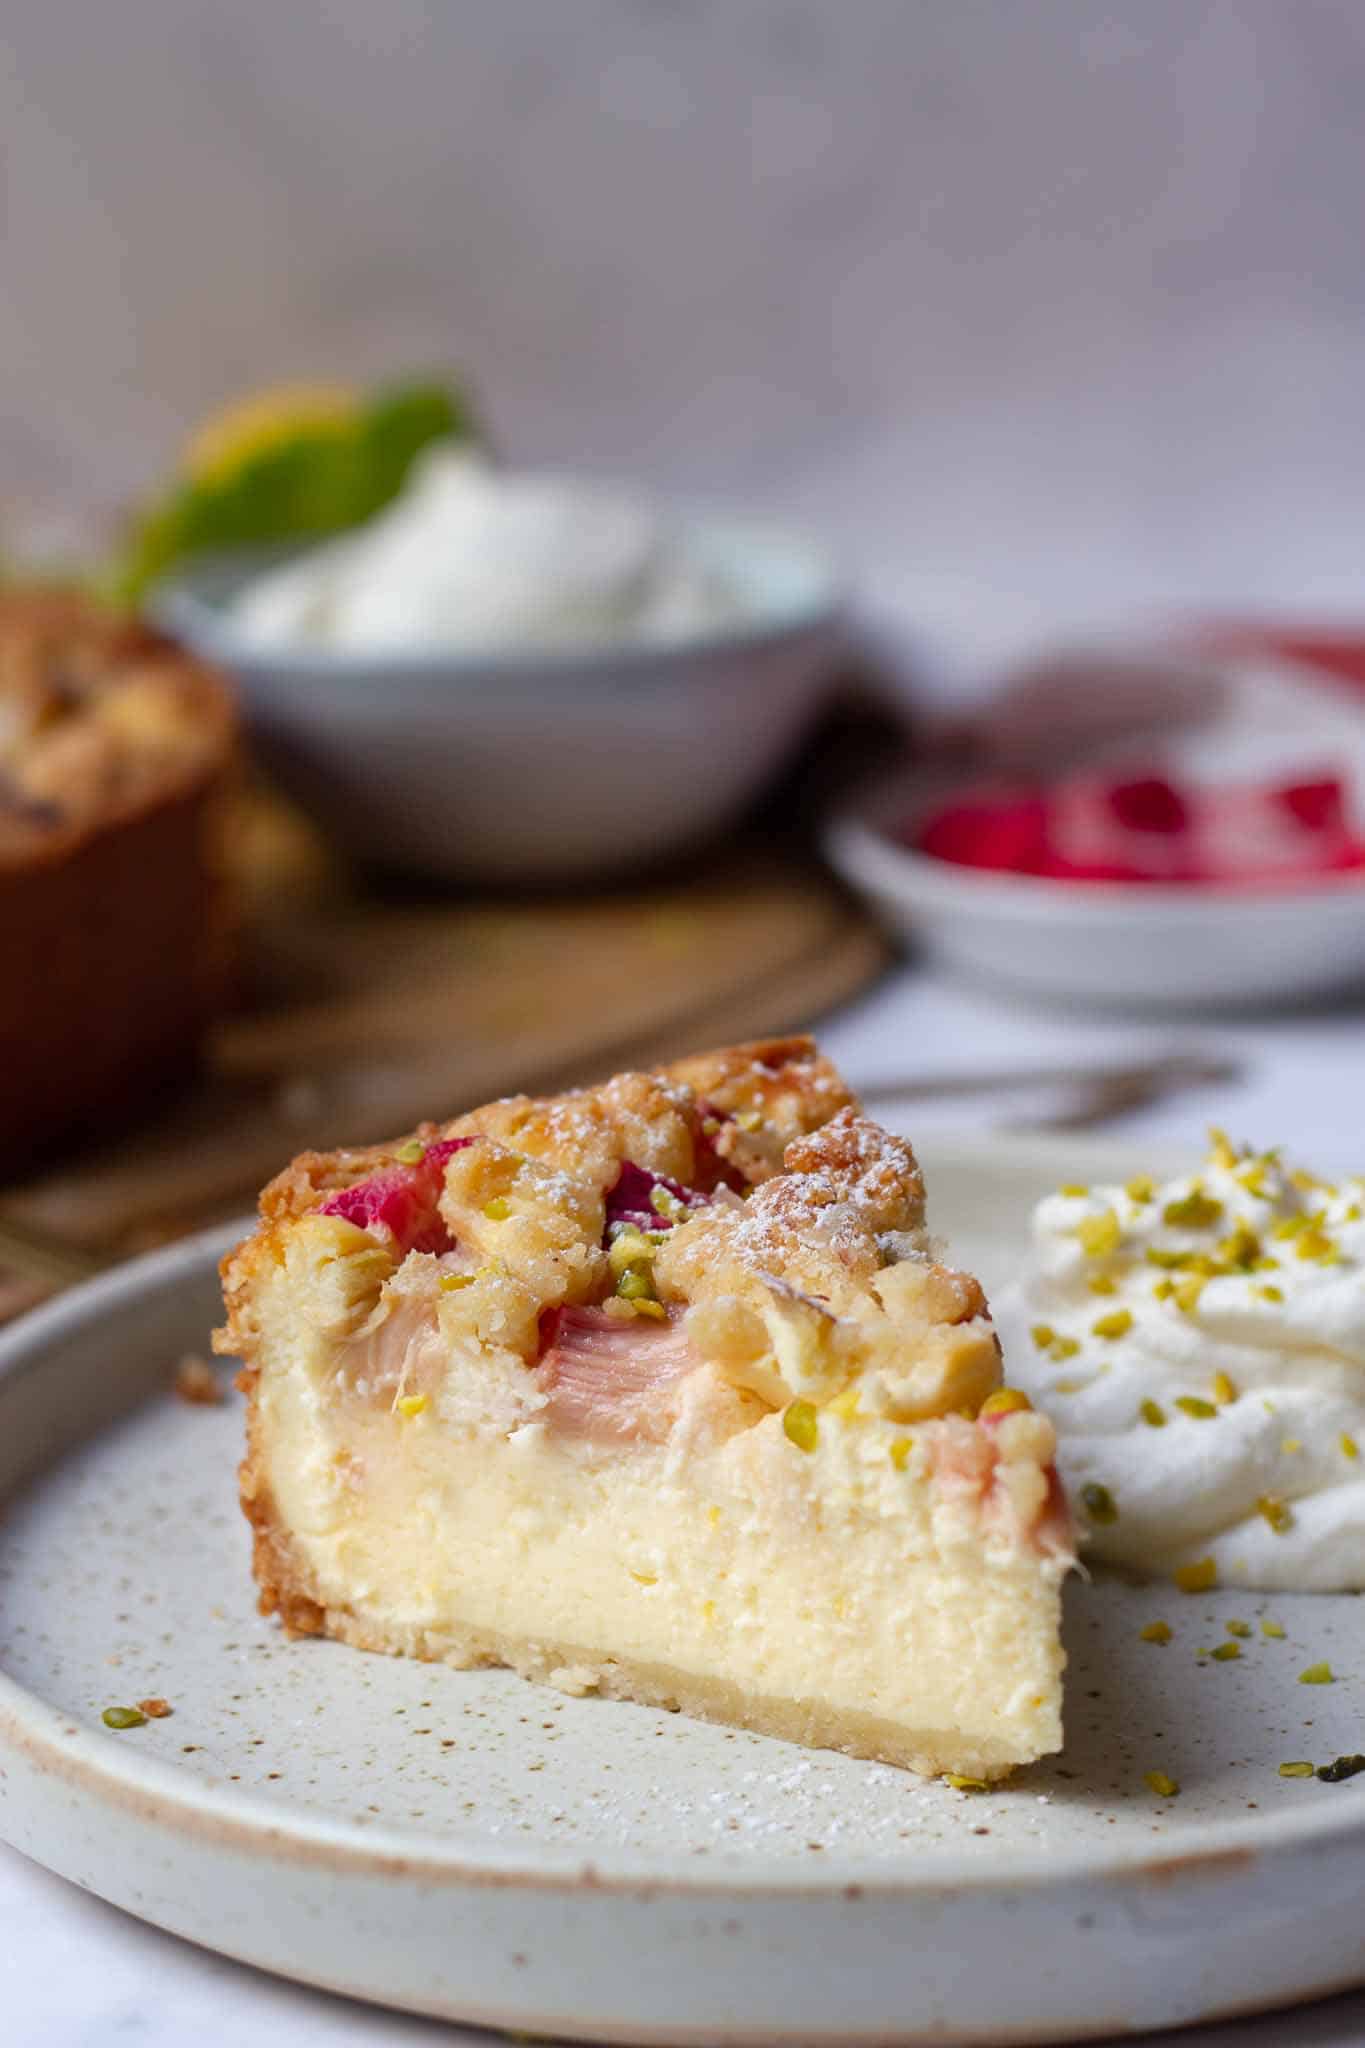 A piece of German rhubarb quark cake with streusel and pistachios.